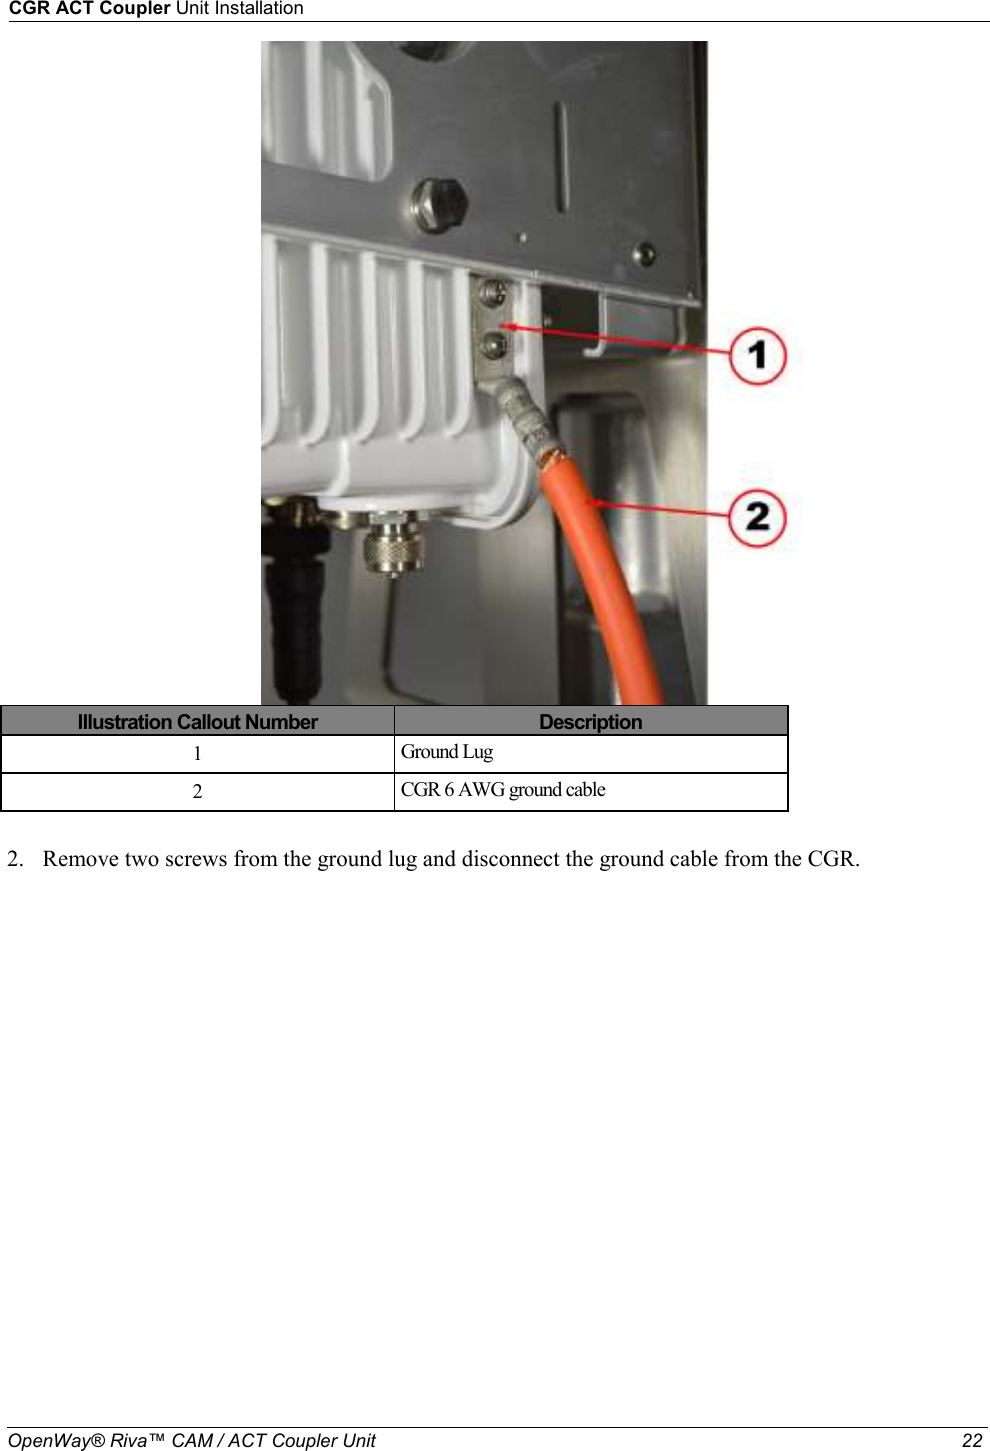 CGR ACT Coupler Unit Installation  OpenWay® Riva™ CAM / ACT Coupler Unit   22                             Illustration Callout Number  Description 1  Ground Lug 2  CGR 6 AWG ground cable  2. Remove two screws from the ground lug and disconnect the ground cable from the CGR.  